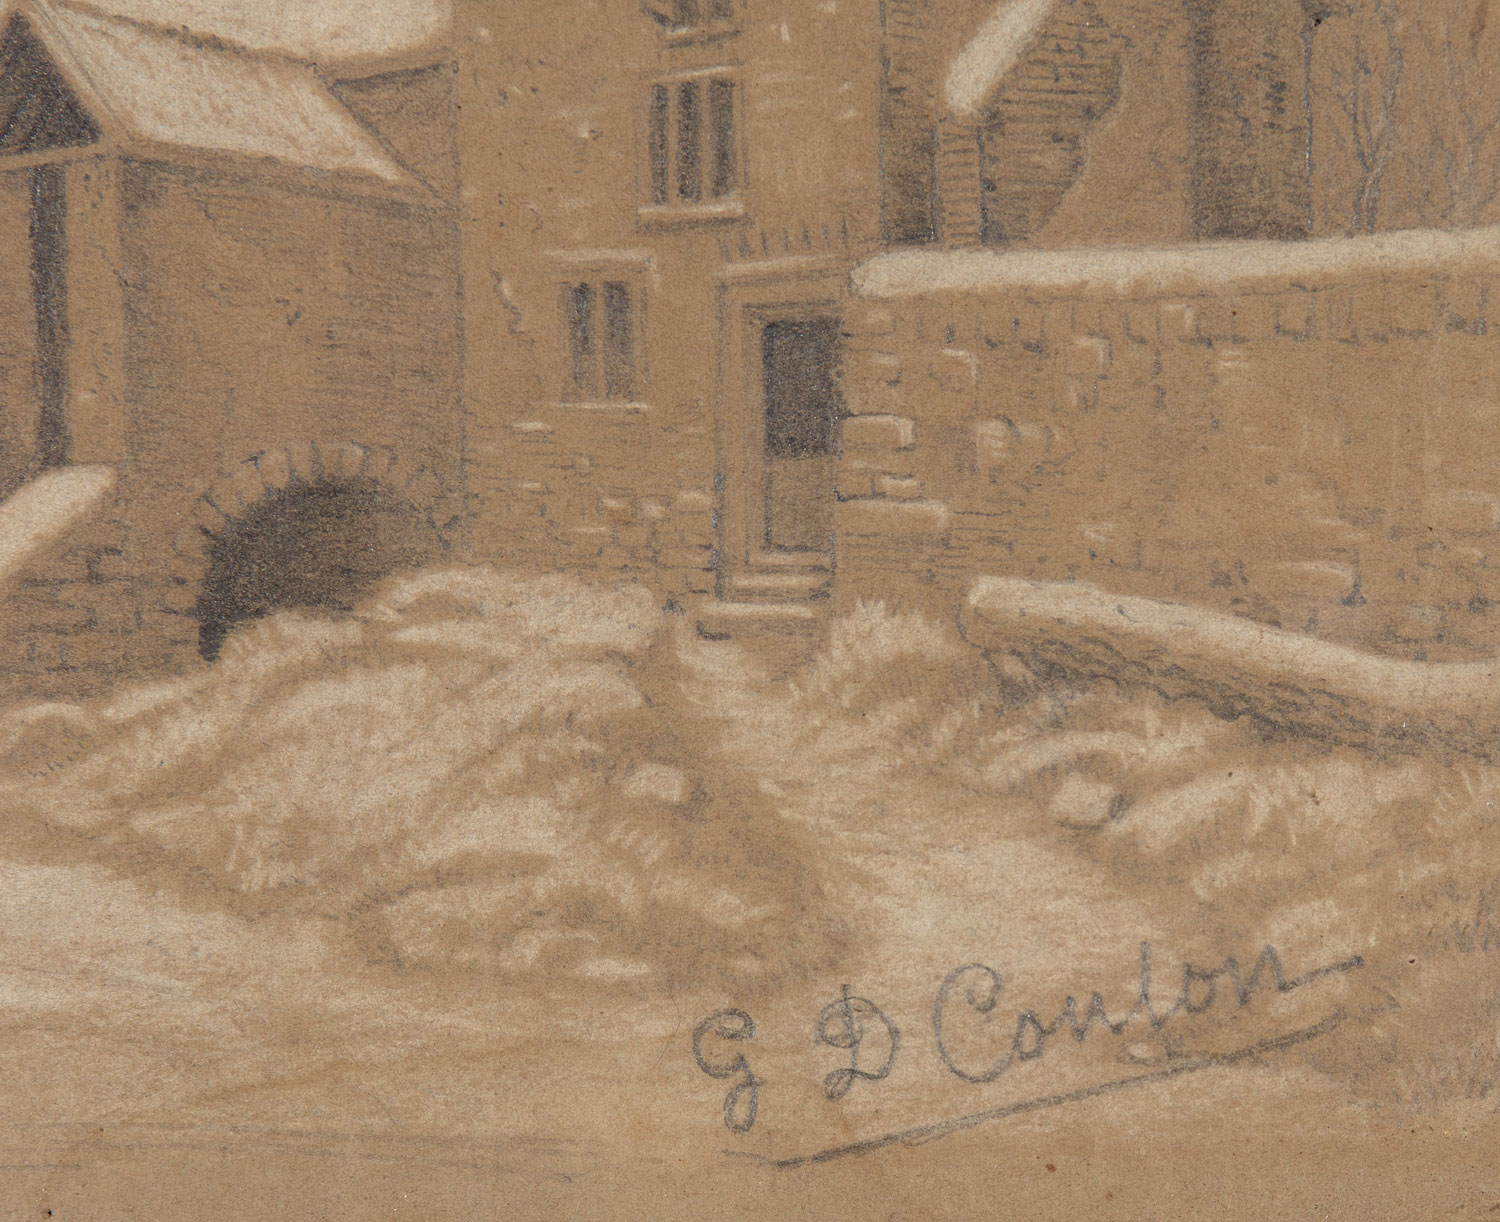 George David Coulon (French/New Orleans, 1822-1904) , "Winter Scene", pencil and crayon on paper, - Image 2 of 3